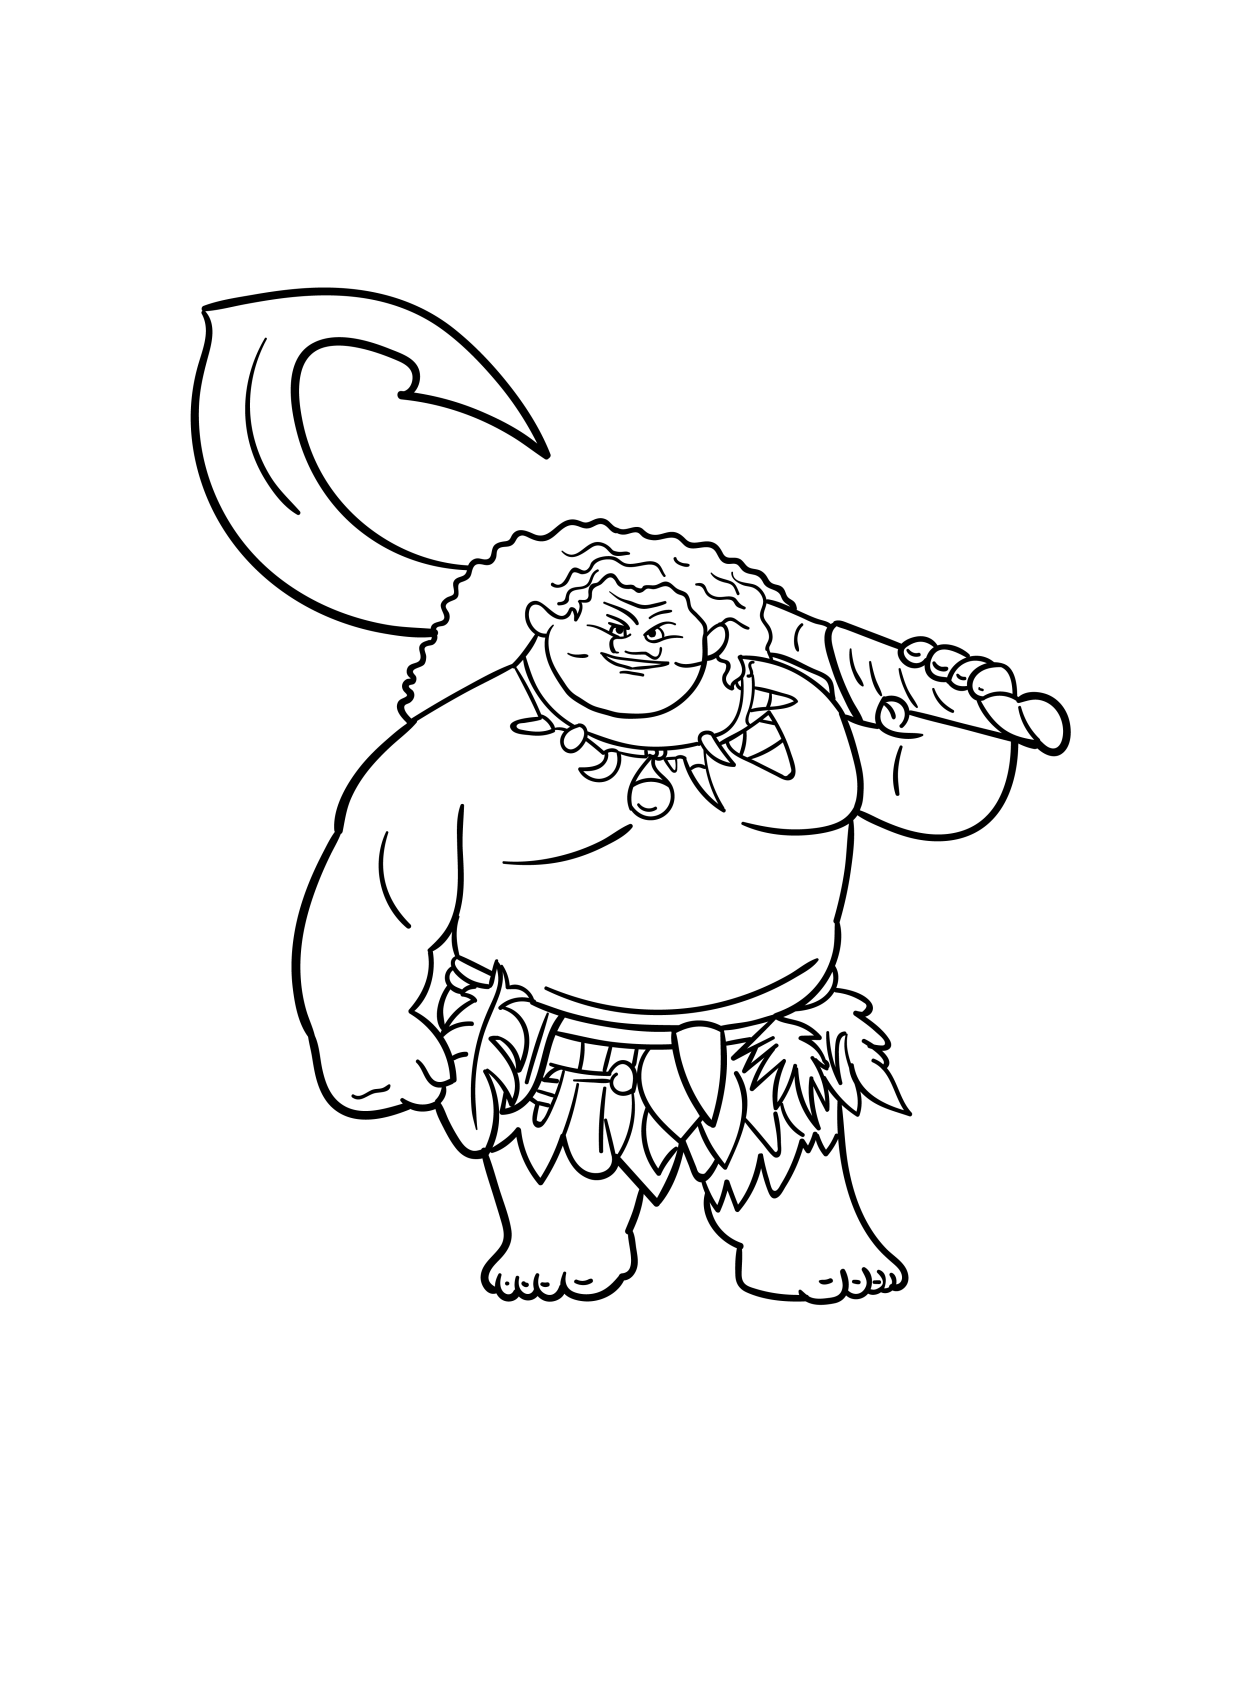 Maui From Moana coloring pages